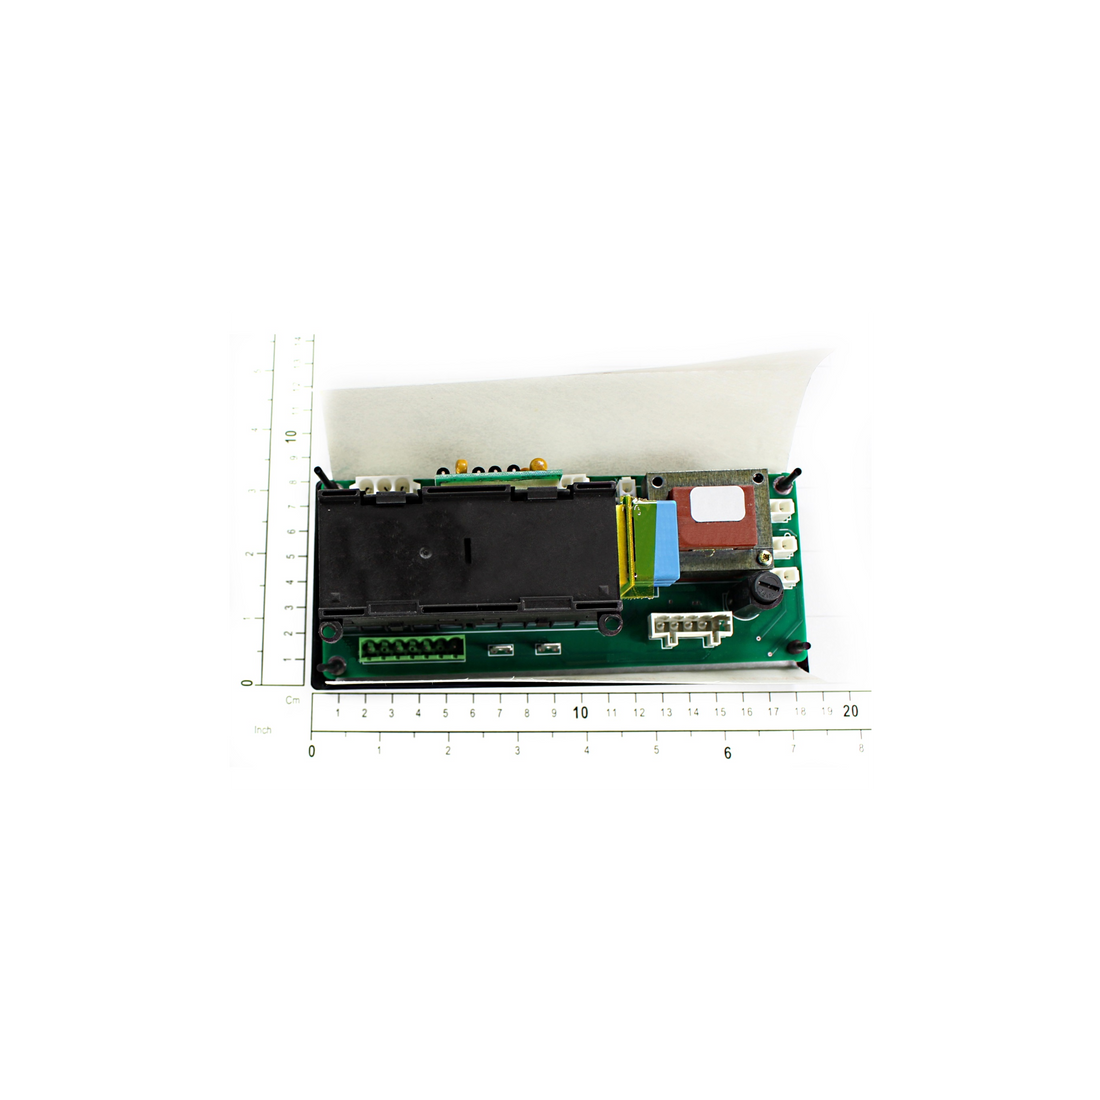 R&M Parts - Electrical Board, Part Number: 3000007100